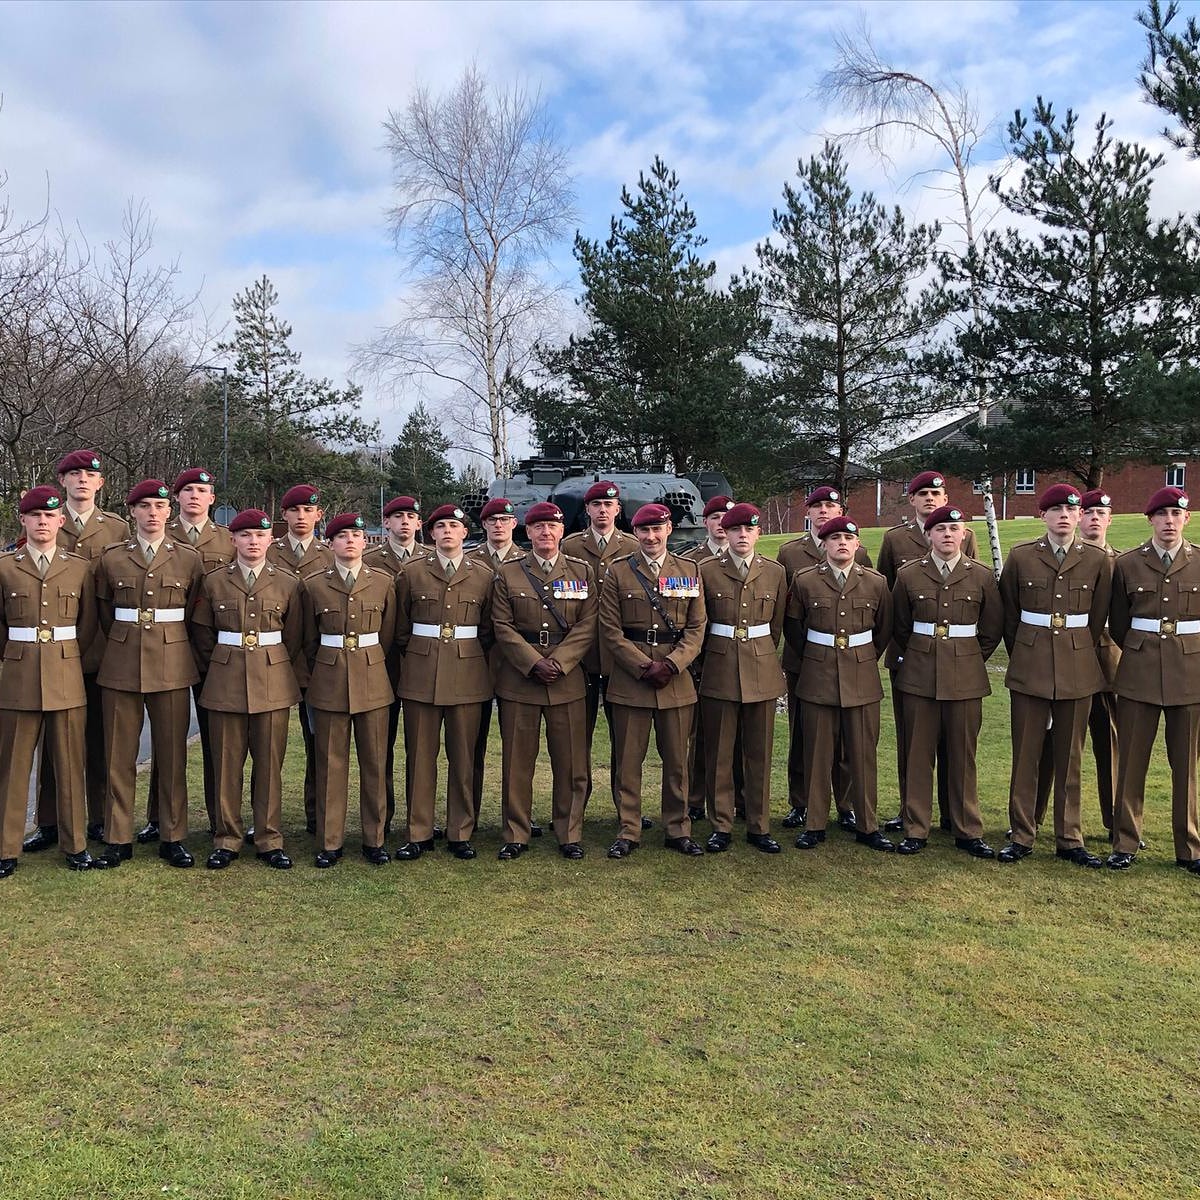 This photo shows members from the Graduation Parade of Waterloo and Cambrai Companies from the Army Foundation College Harrogate. Within Waterloo Company were a number of young men, who are now bound for the Parachute Regiment Training Company at ITC Catterick.